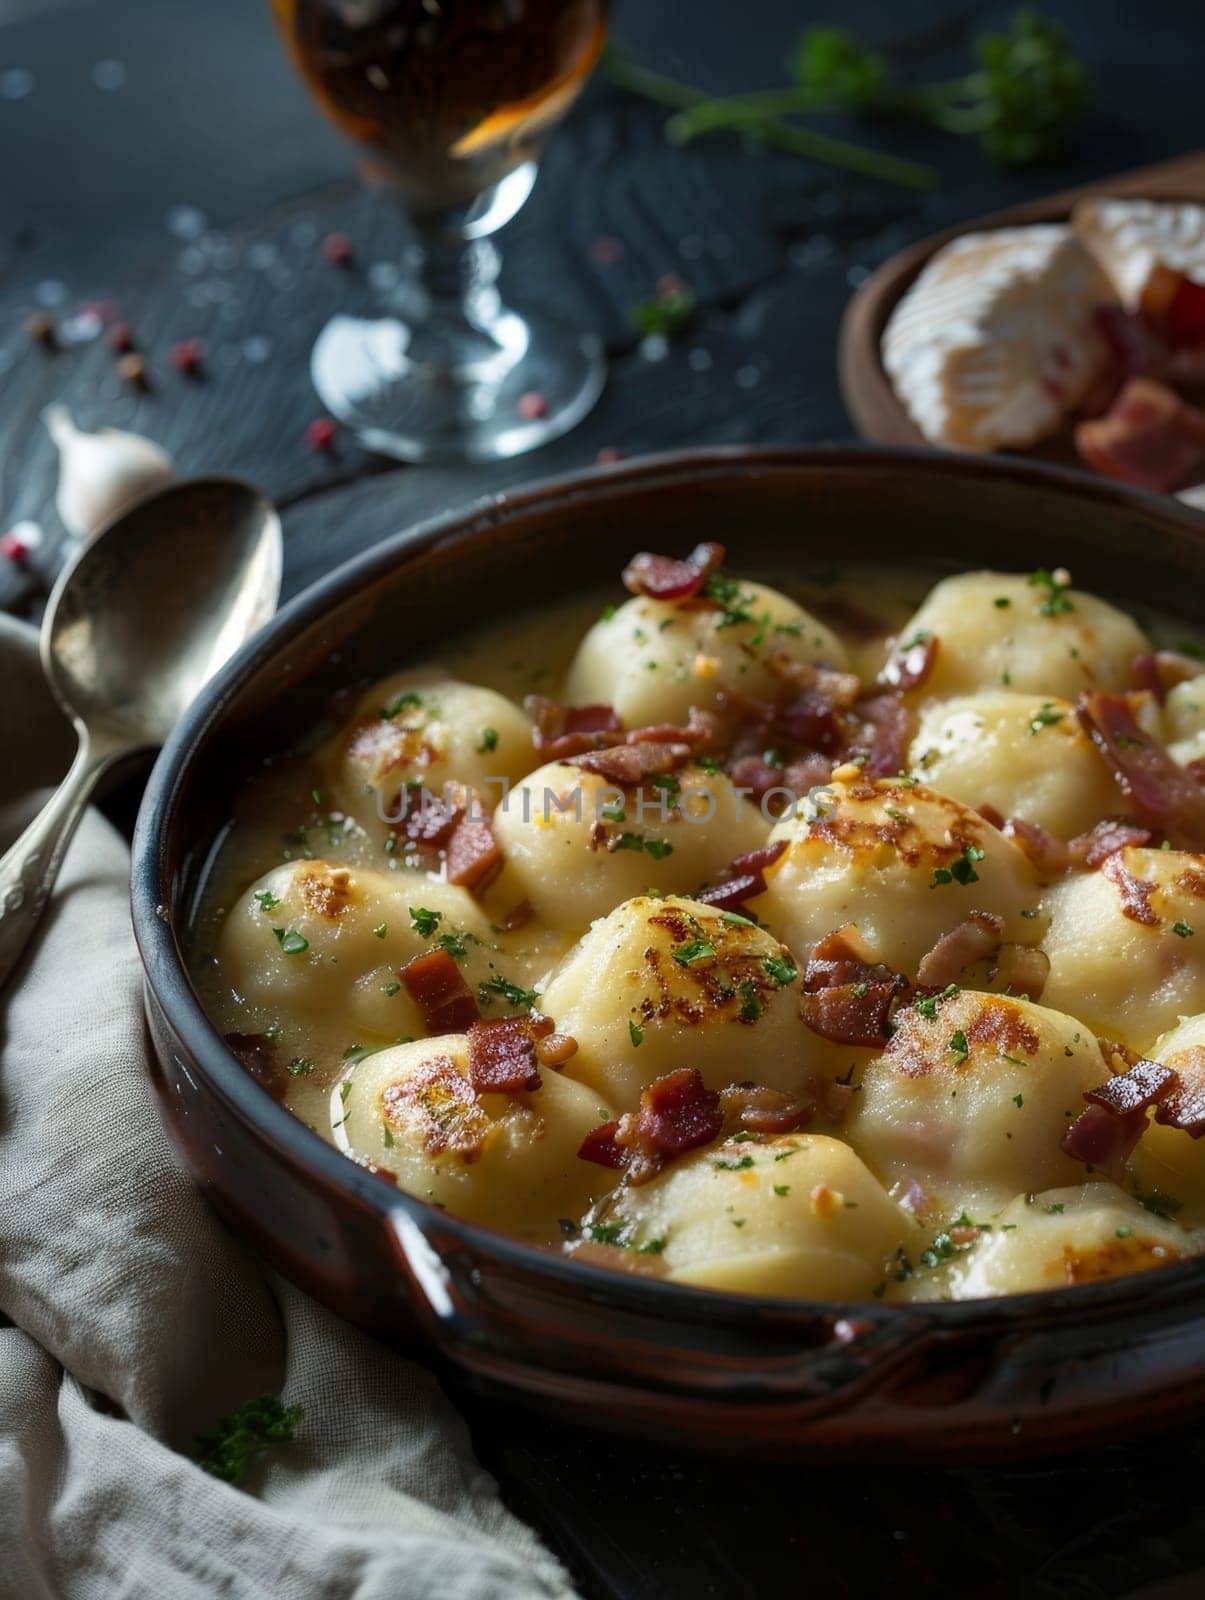 Slovakian bryndzovy halusky in a bowl, potato dumplings with sheep cheese and bacon. A traditional and hearty dish from Slovakia